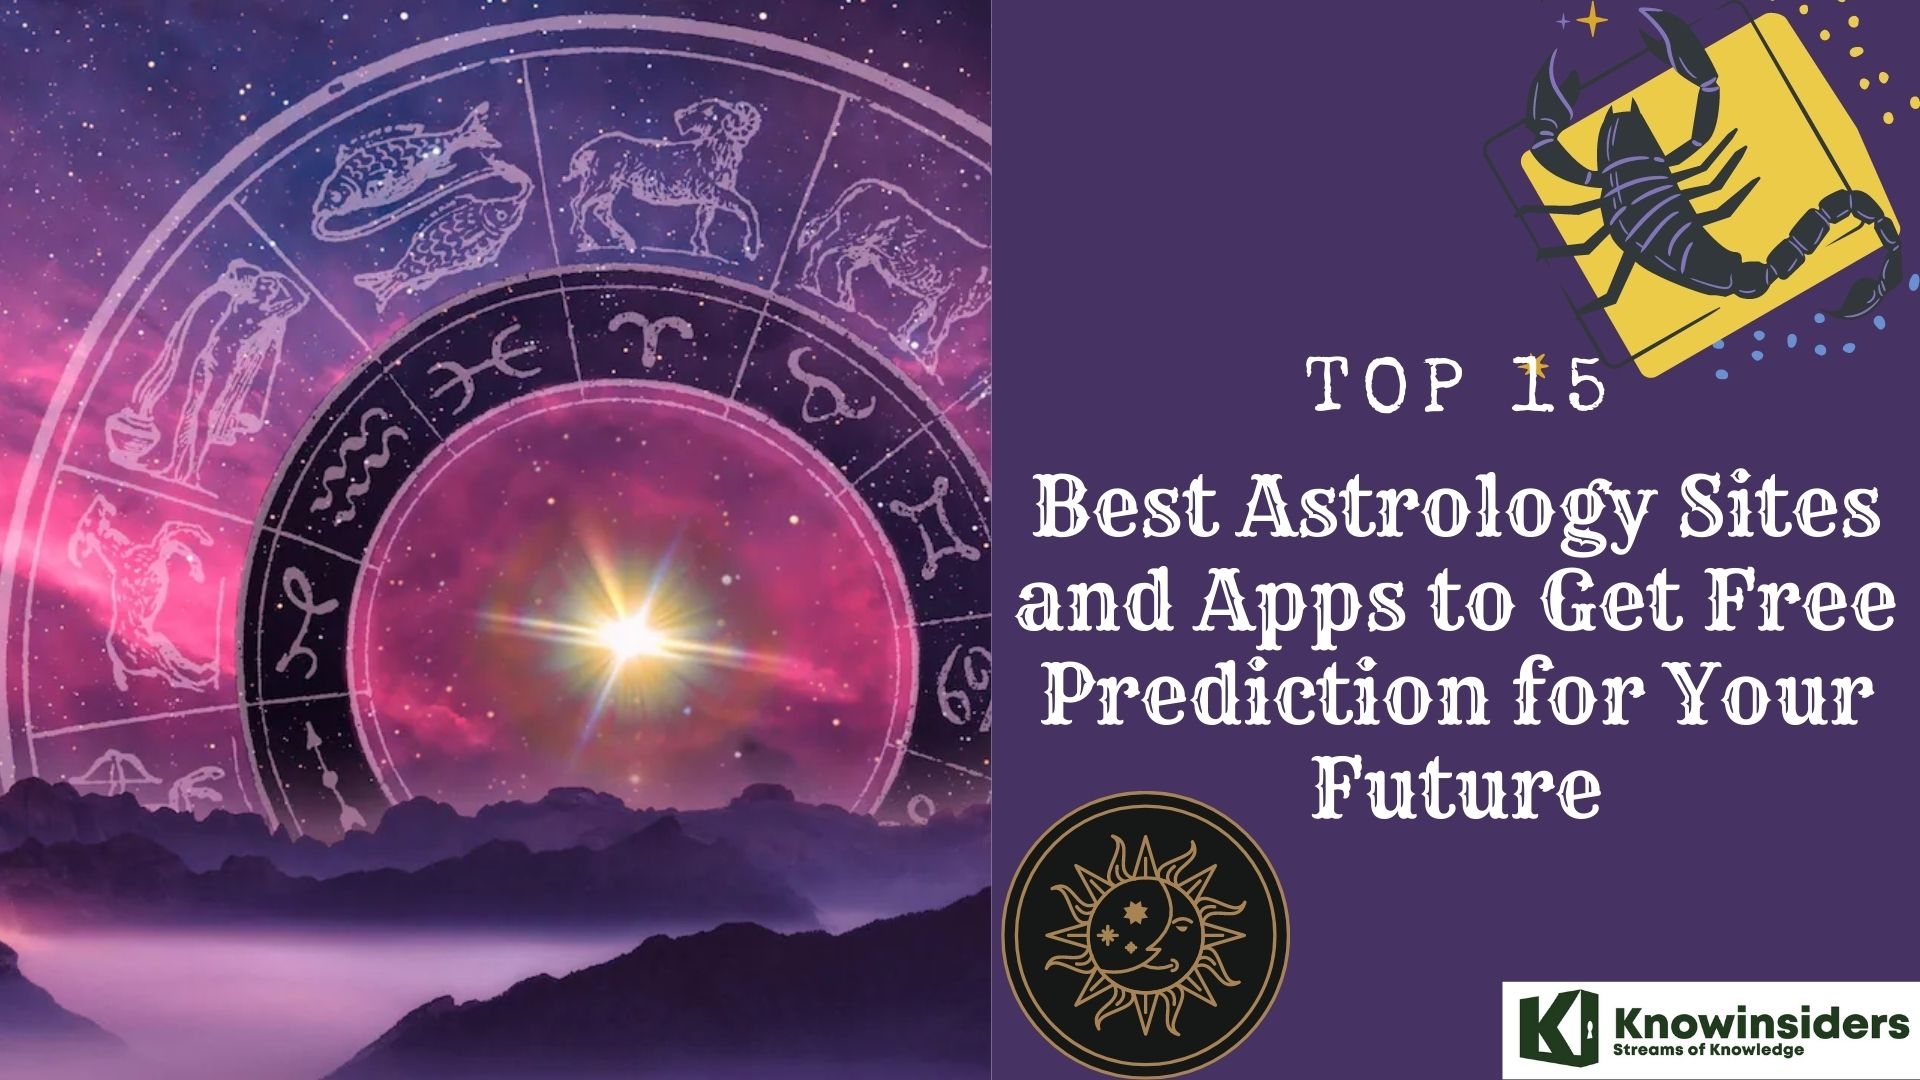 Top 15+ Best Astrology Sites and Apps to Get Free Prediction for Your Future